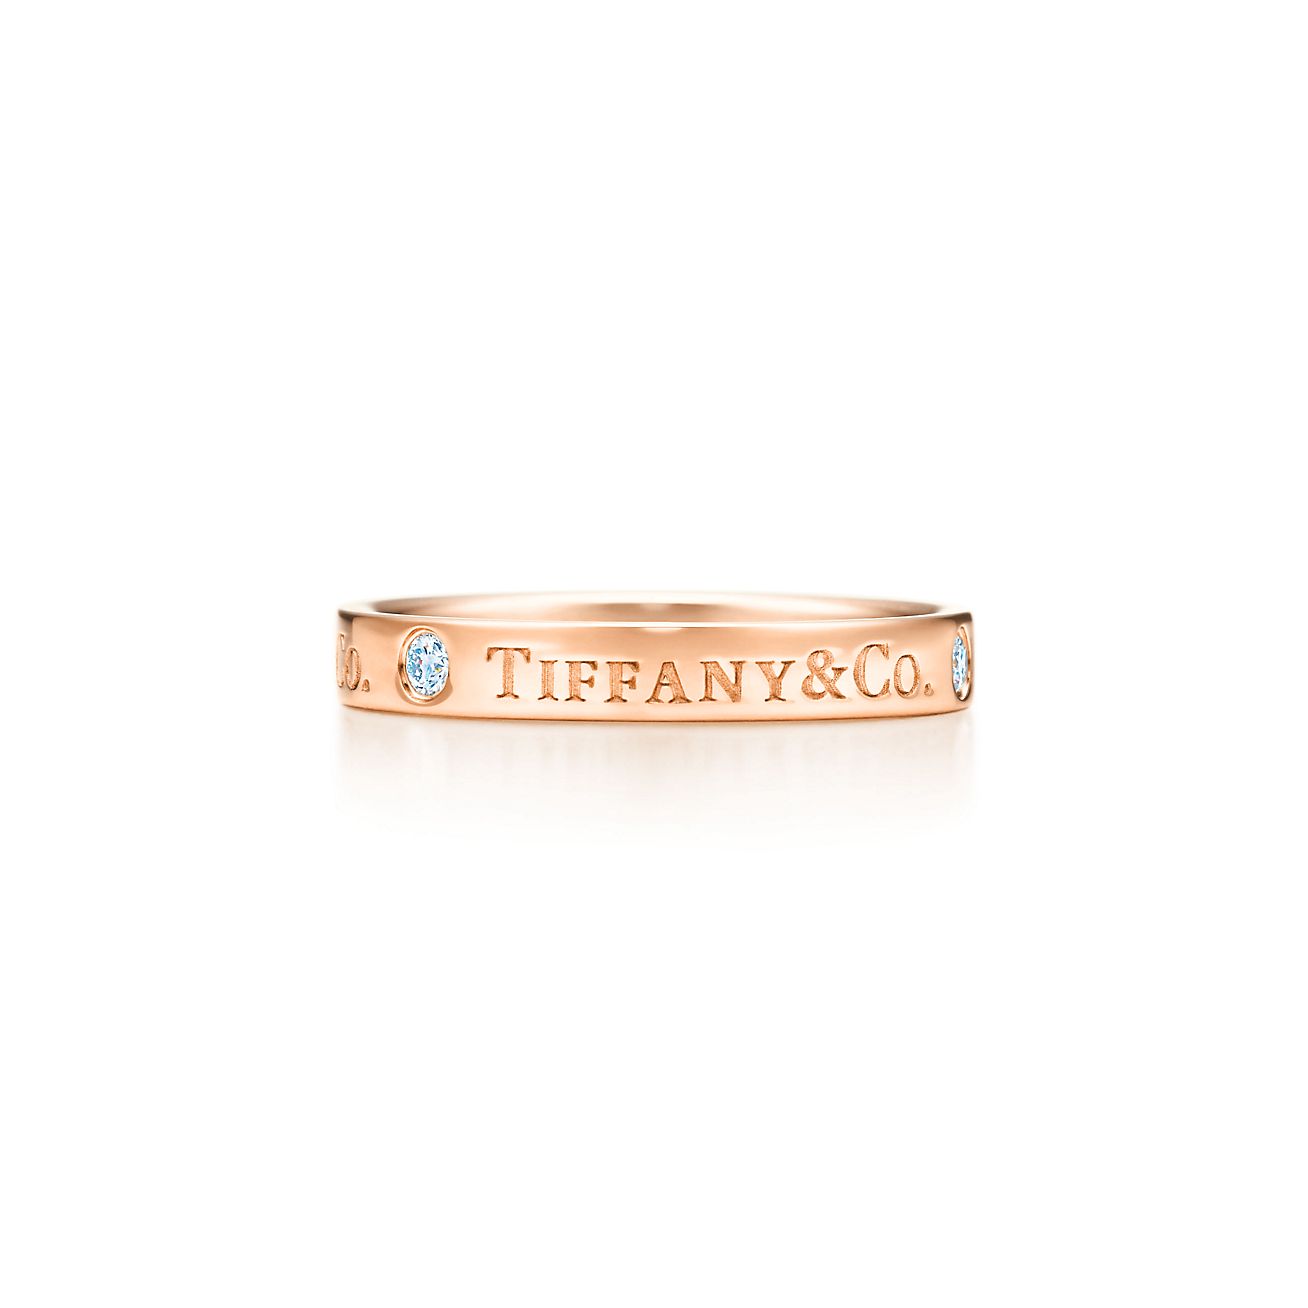 Co.® band ring in 18k rose gold 